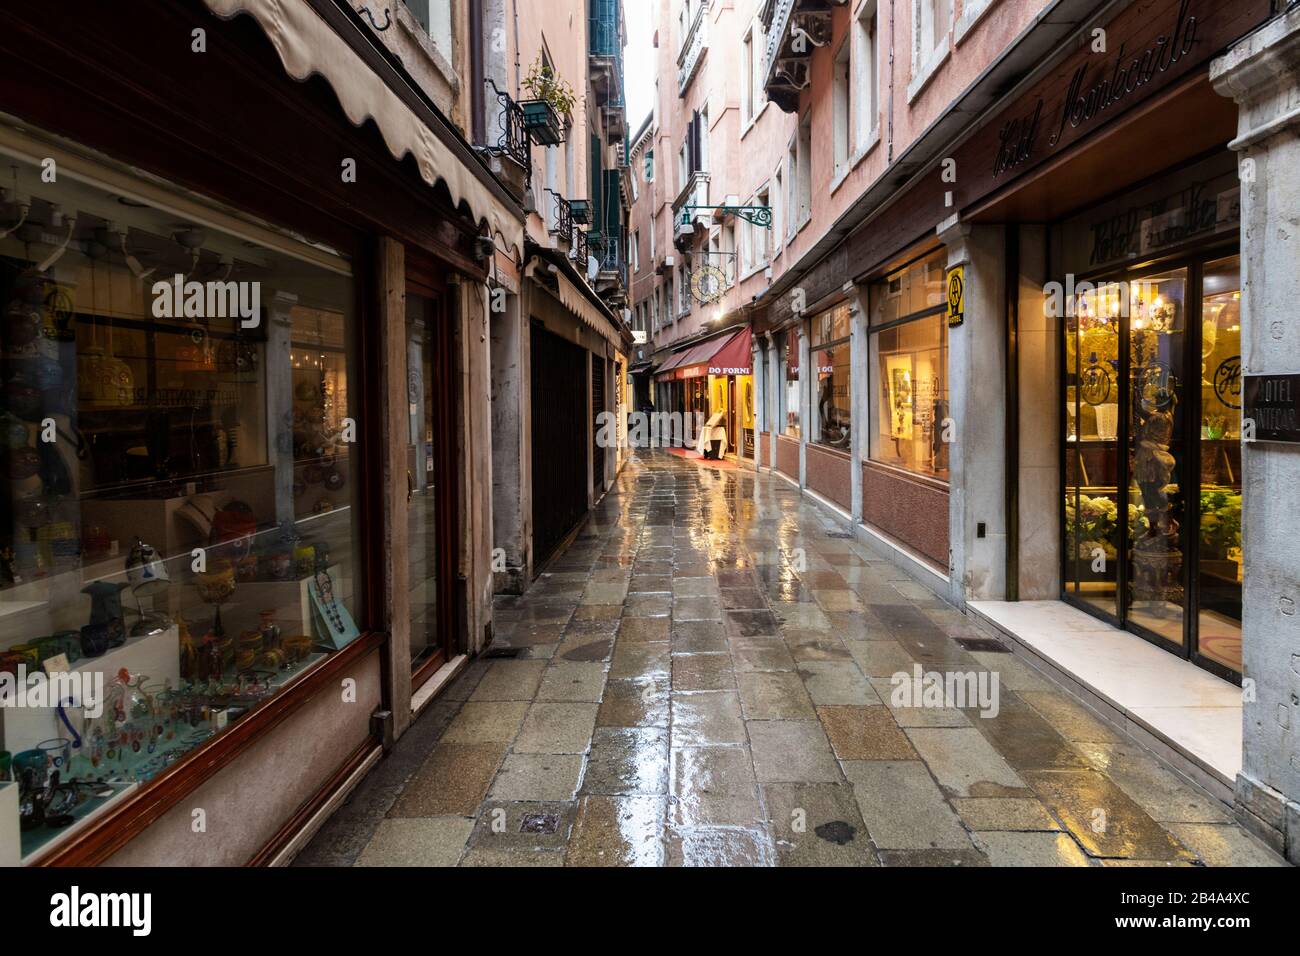 Venice, February 25th - March 3rd. 2020: Venice streets deserted due to Coronavirus pandemic. Piazza's and streets are empty apart from a handful of tourists and locals going about their daily business. Many tourists cancel their visit for fear of catching the virus. Tourists from Japan and other far eastern countries like Taiwan  often wear surgical masks as a preventative measure. Stock Photo